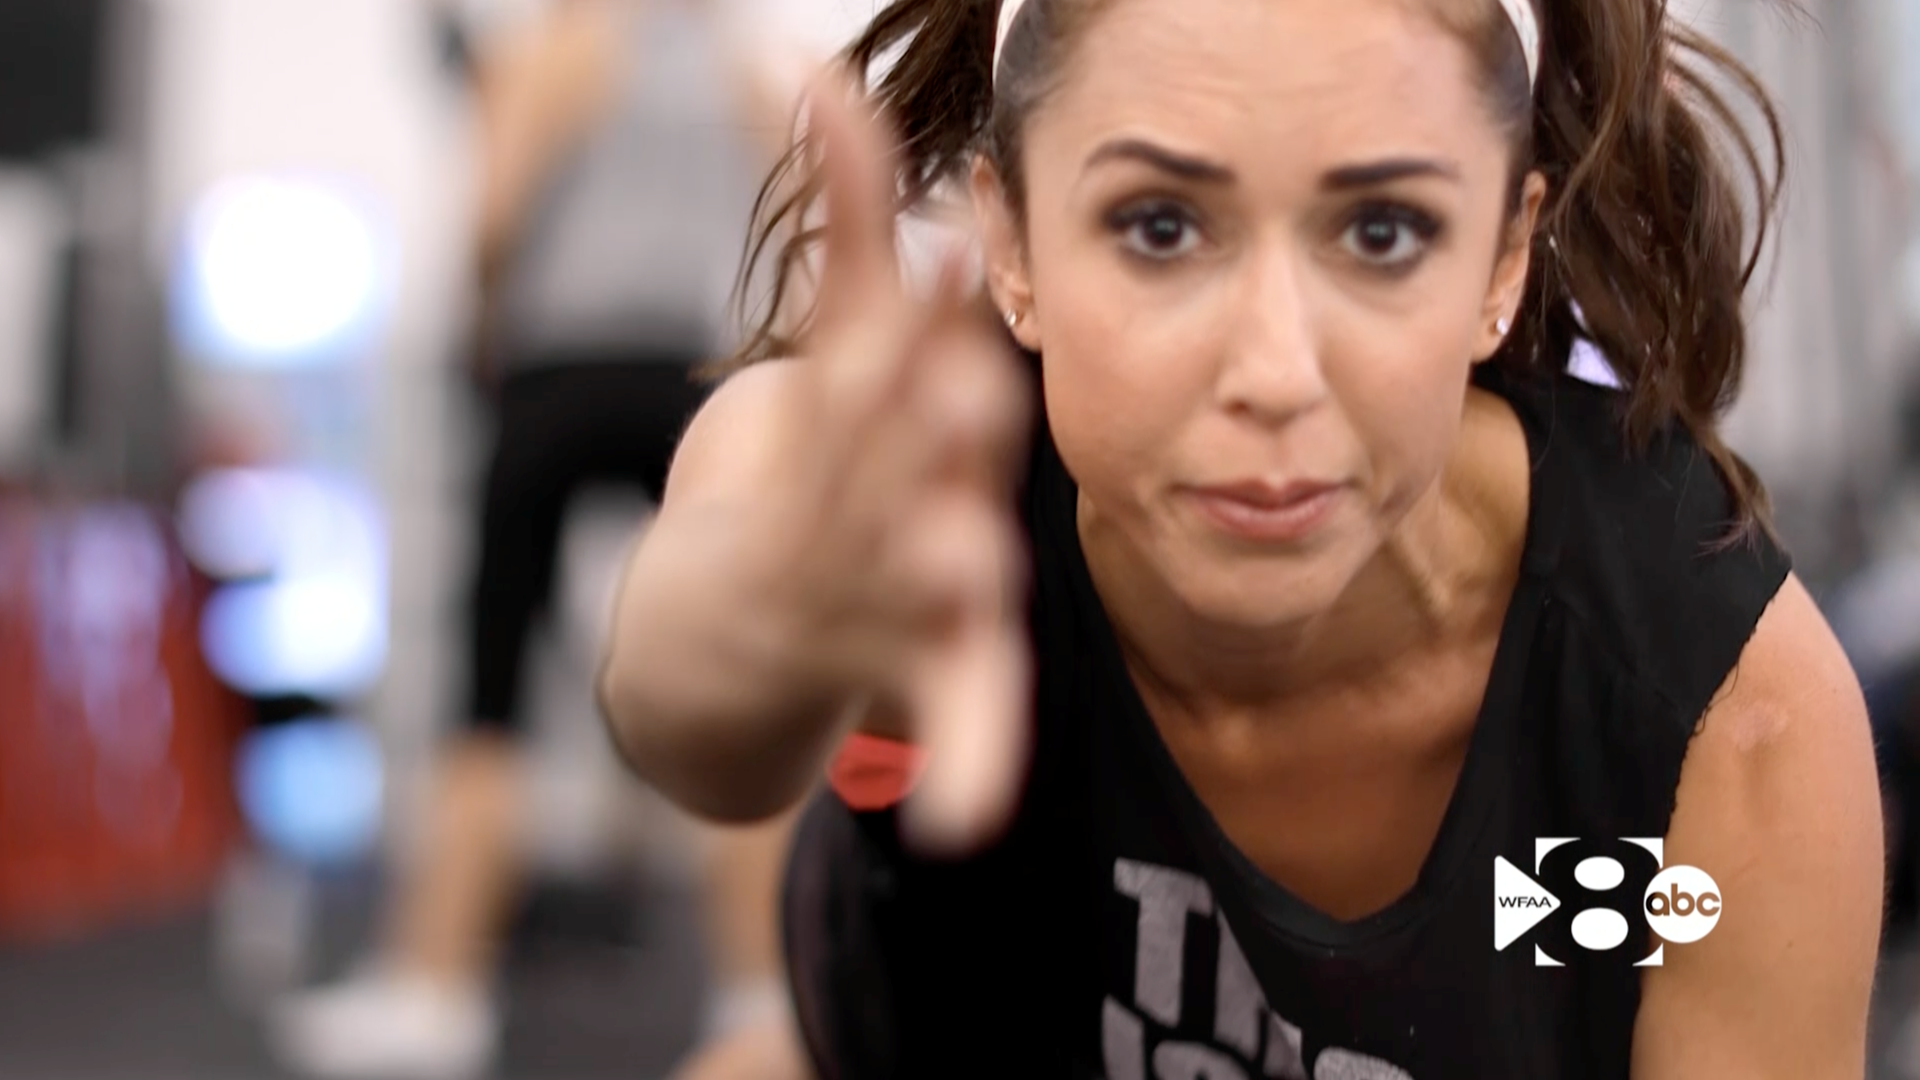 WFAA's Sonia Azad helps North Texans focus on fitness through a "Fitter Together" challenge.